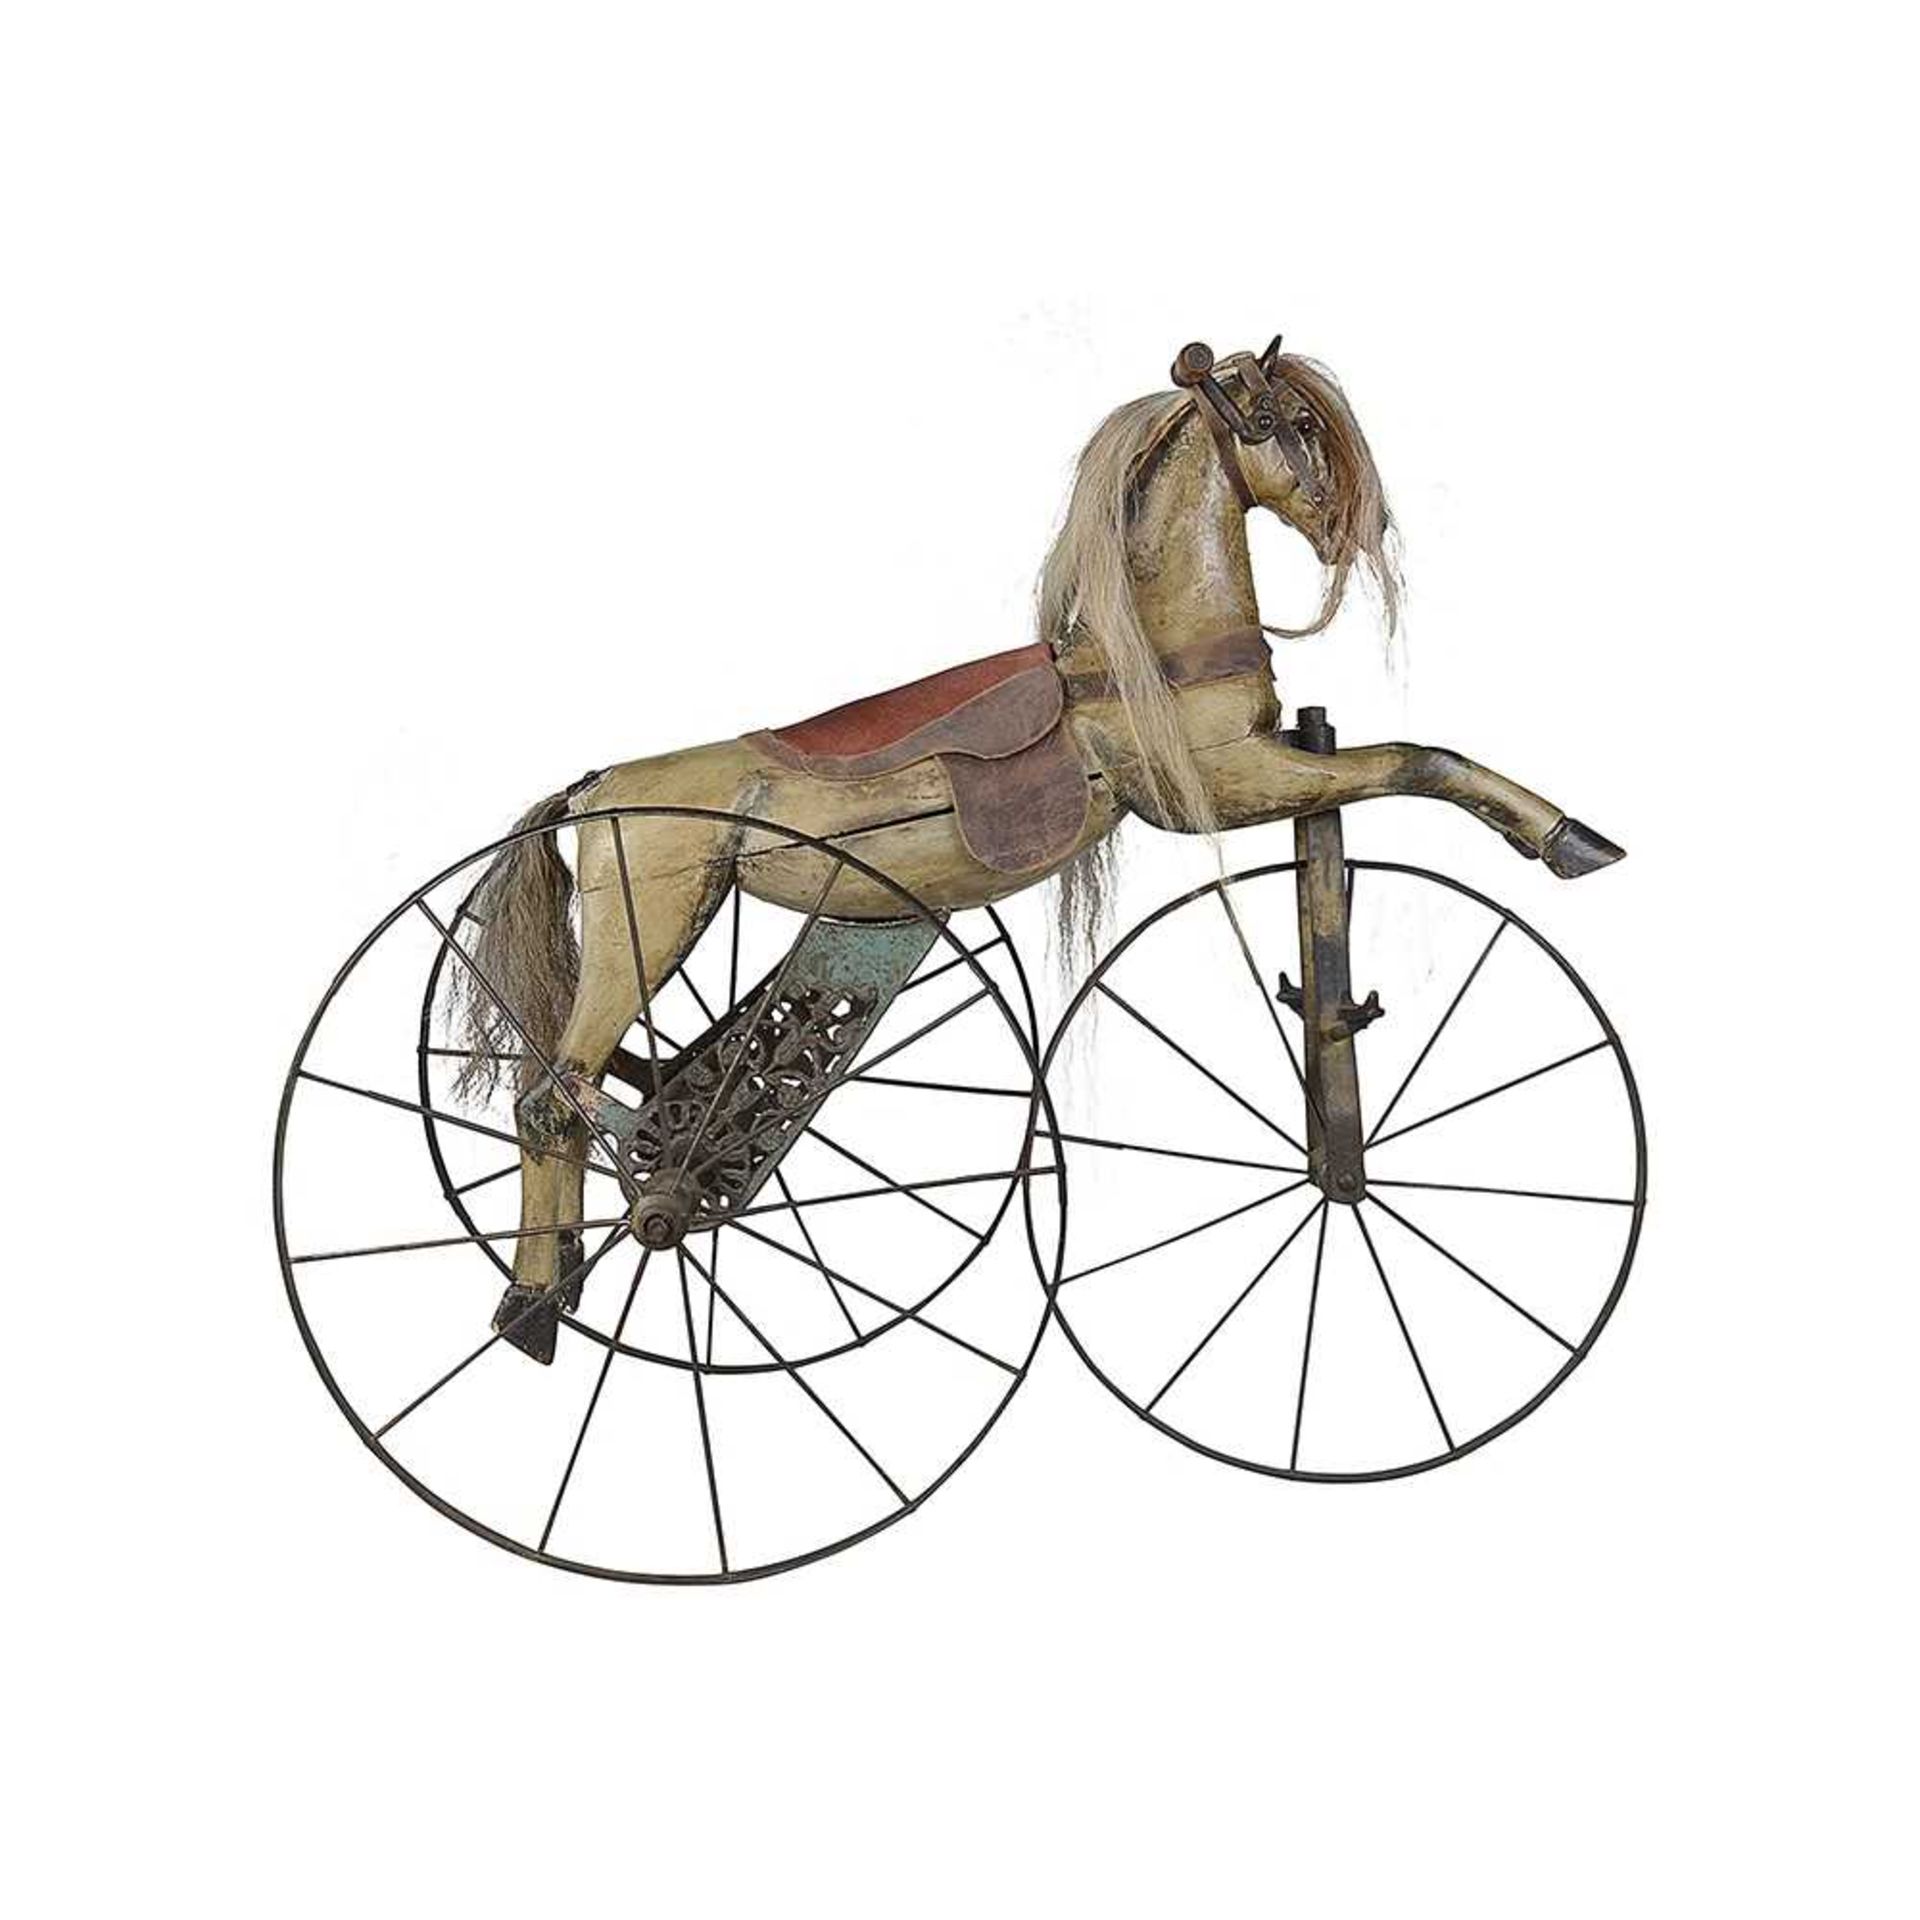 A LATE 19TH CENTURY FRENCH PAINTED WOOD HORSE CHAIN DRIVEN TRICYCLE OR VELOCIPEDE - Image 2 of 12